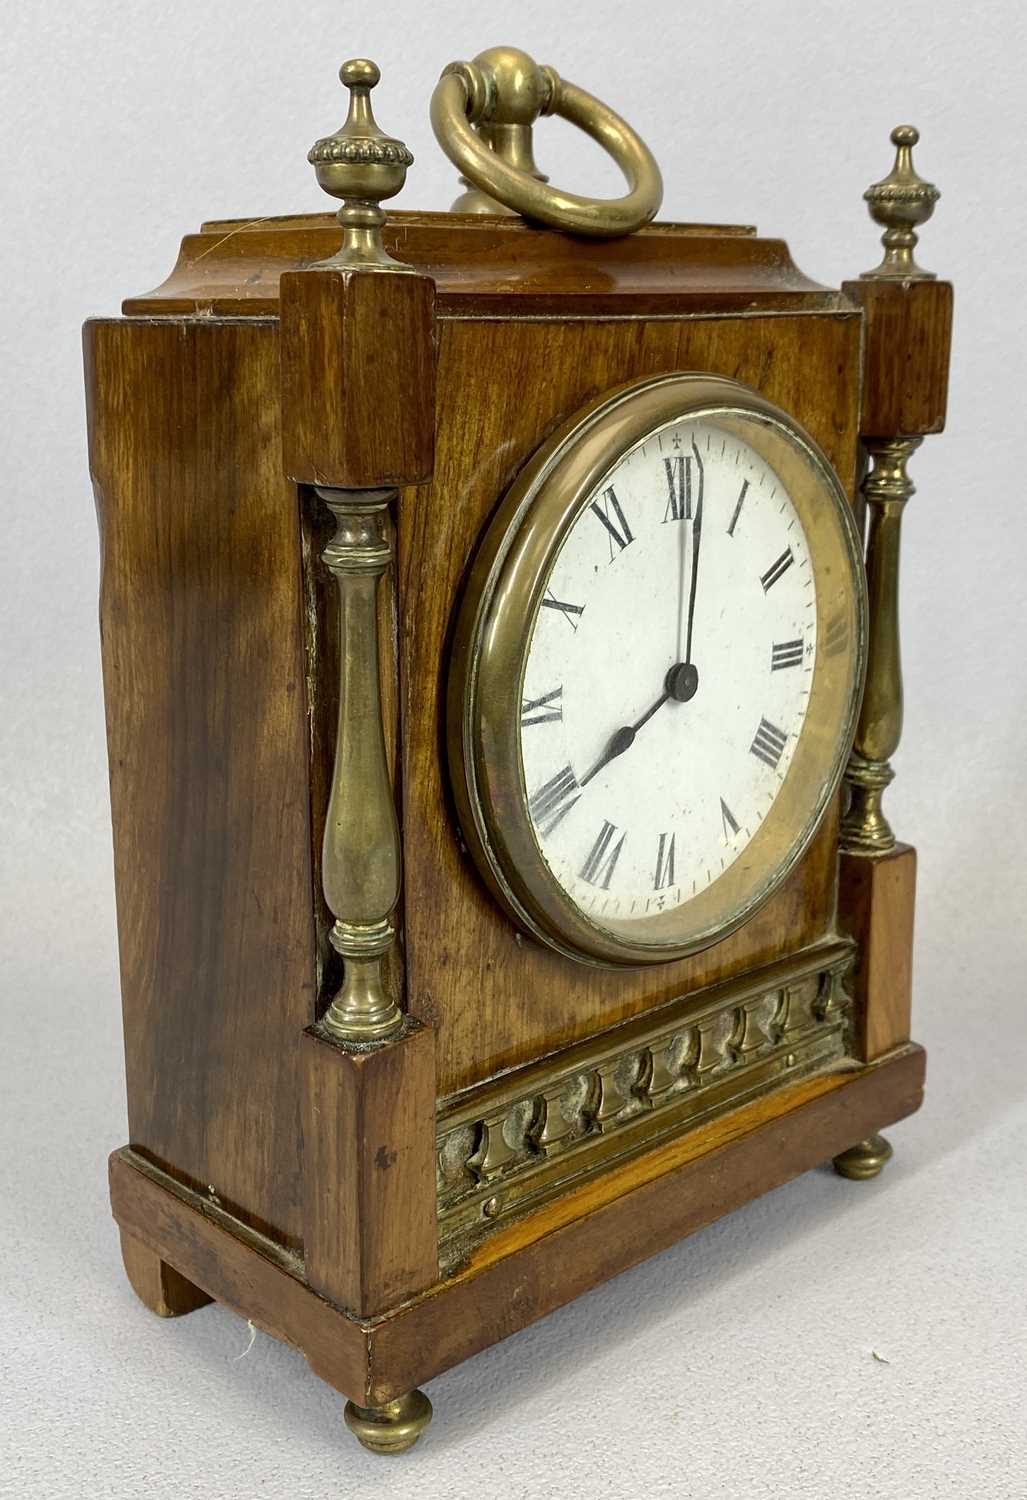 LATE VICTORIAN ORNATE BRASS MOUNTED WALNUT MANTEL CLOCK, with white enamel dial Provenance: - Image 2 of 5